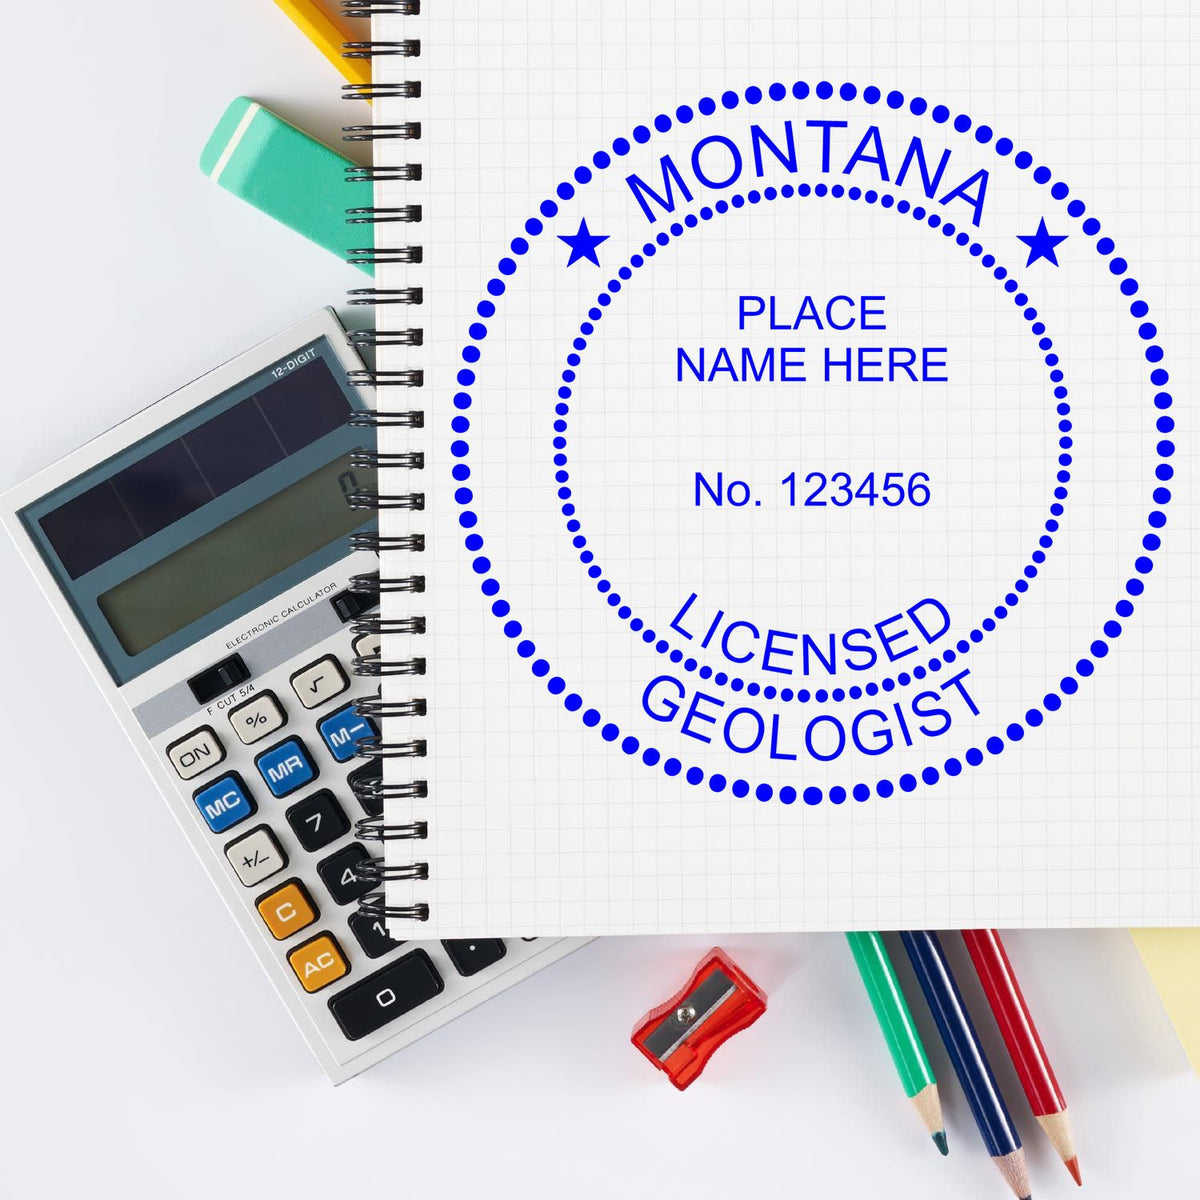 The Slim Pre-Inked Montana Professional Geologist Seal Stamp stamp impression comes to life with a crisp, detailed image stamped on paper - showcasing true professional quality.